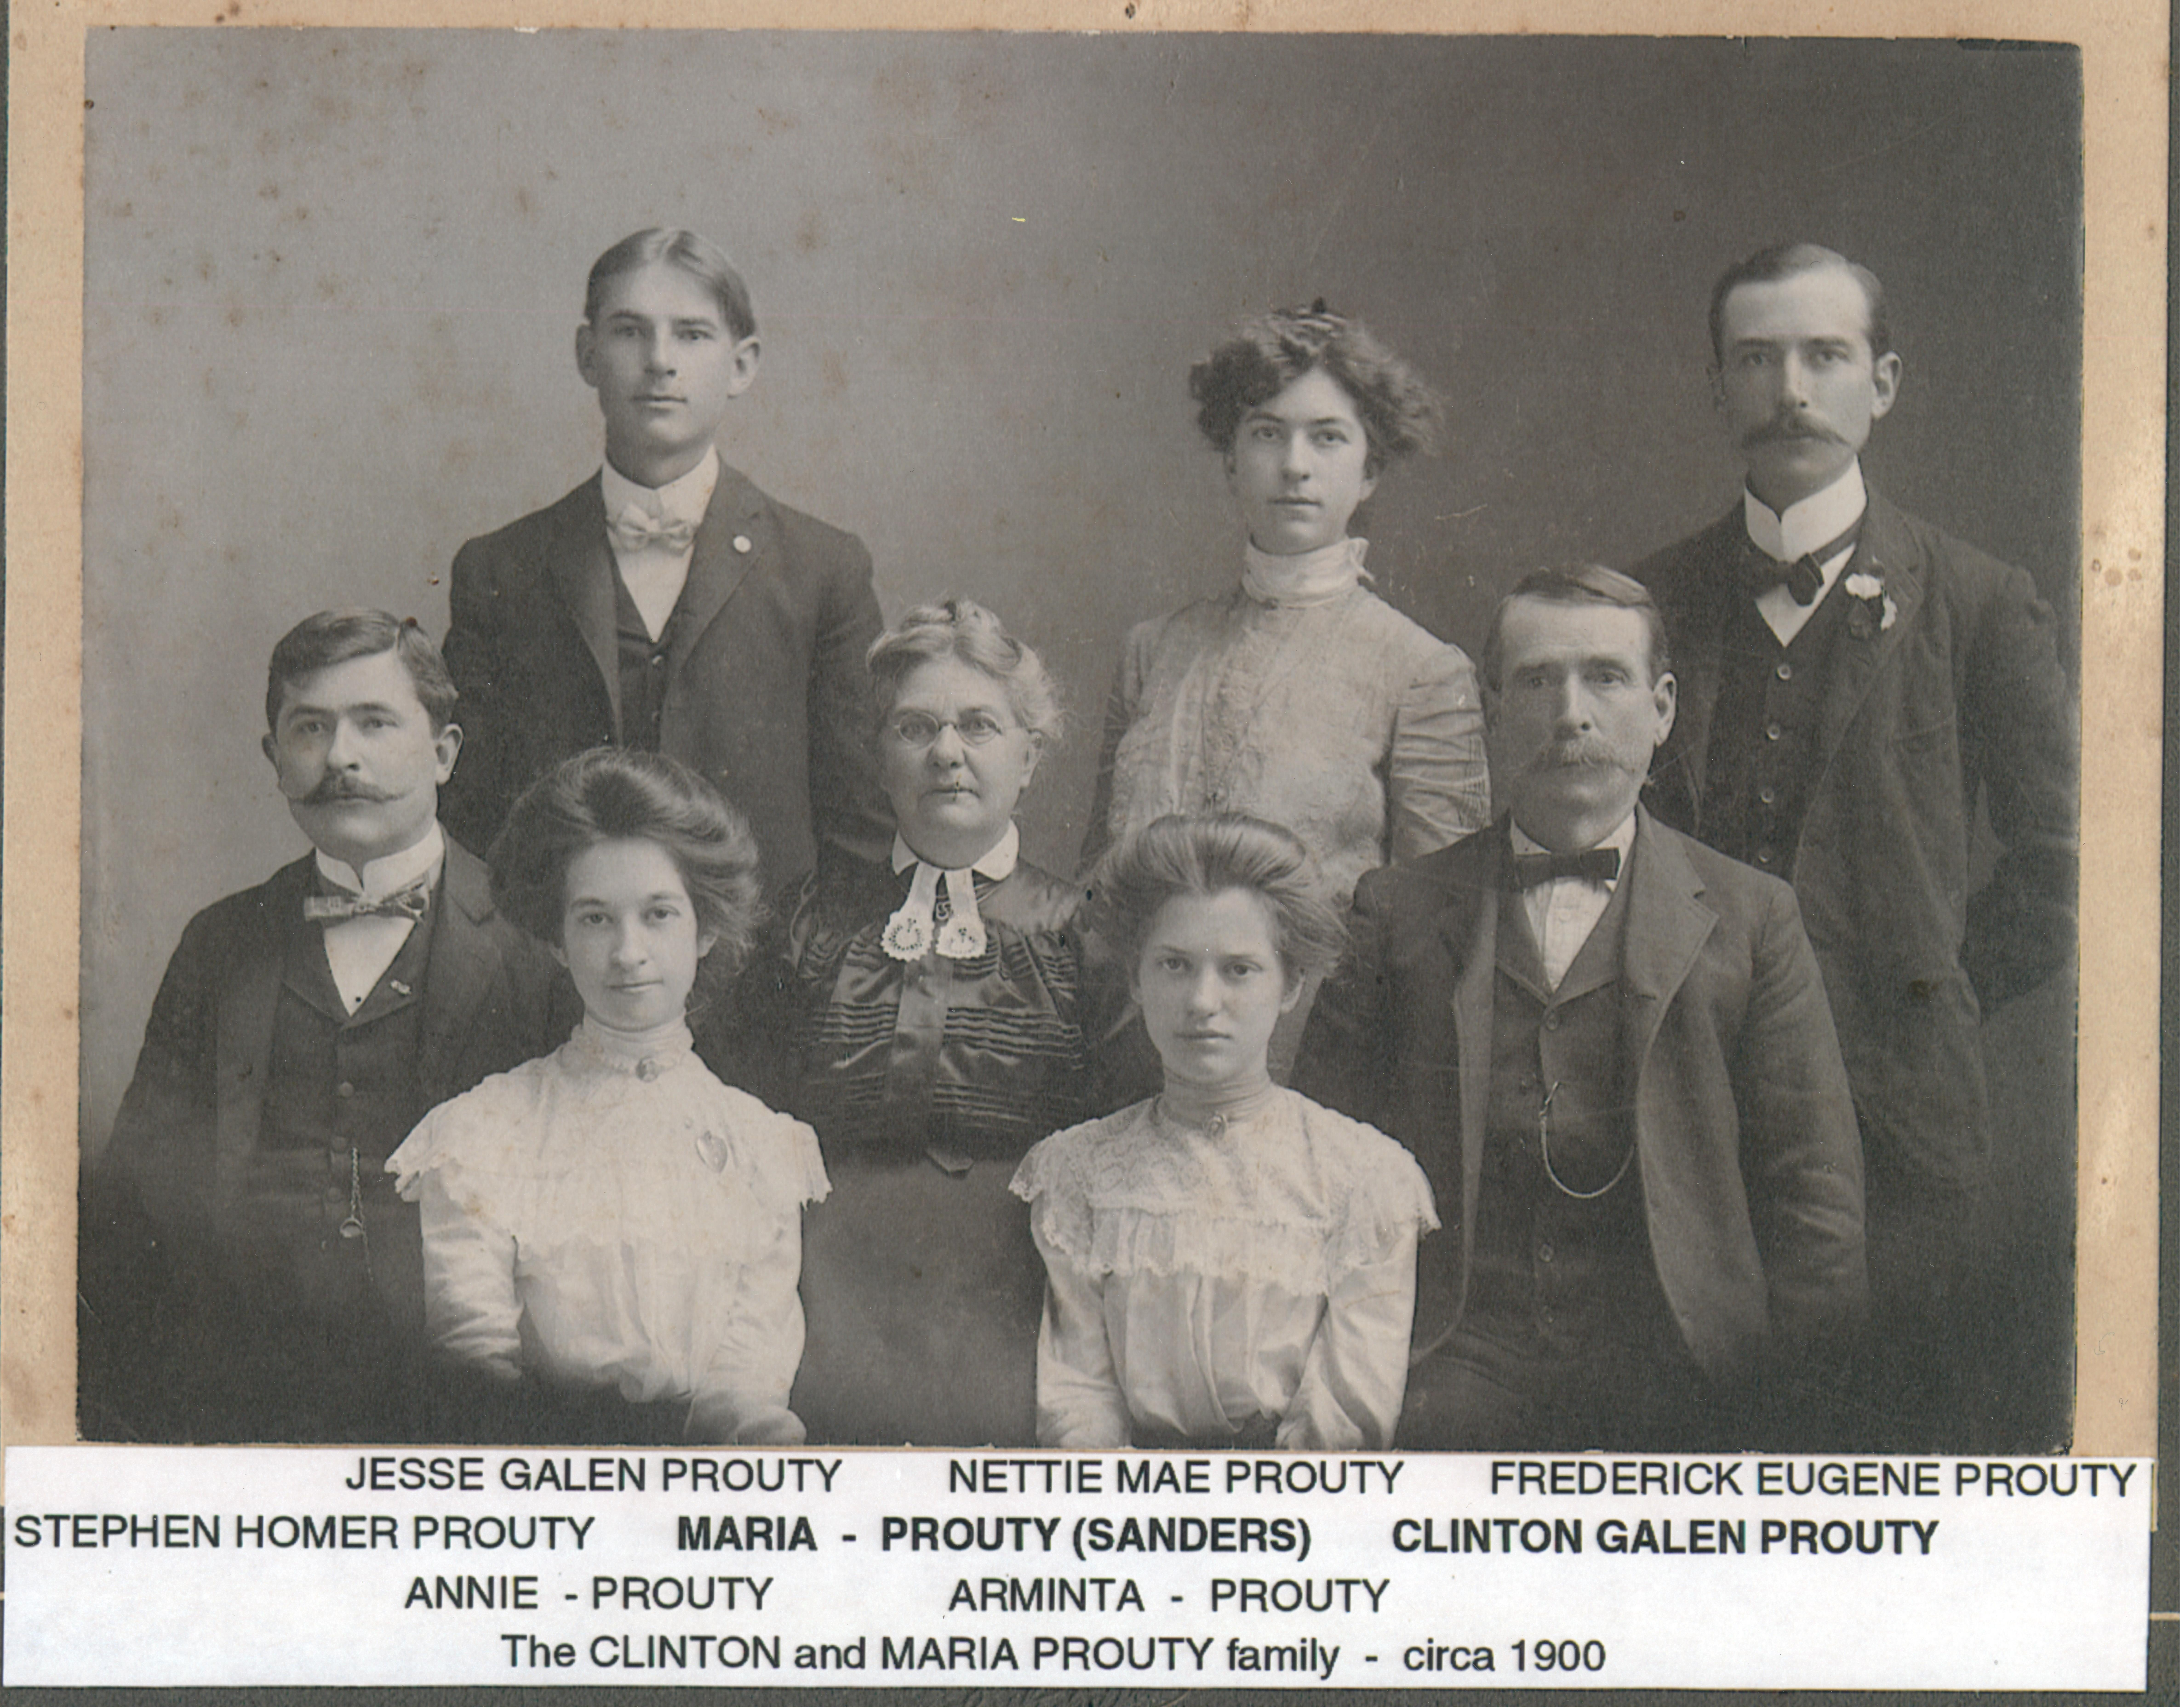 Prouty-Sanders family  ca. 1900